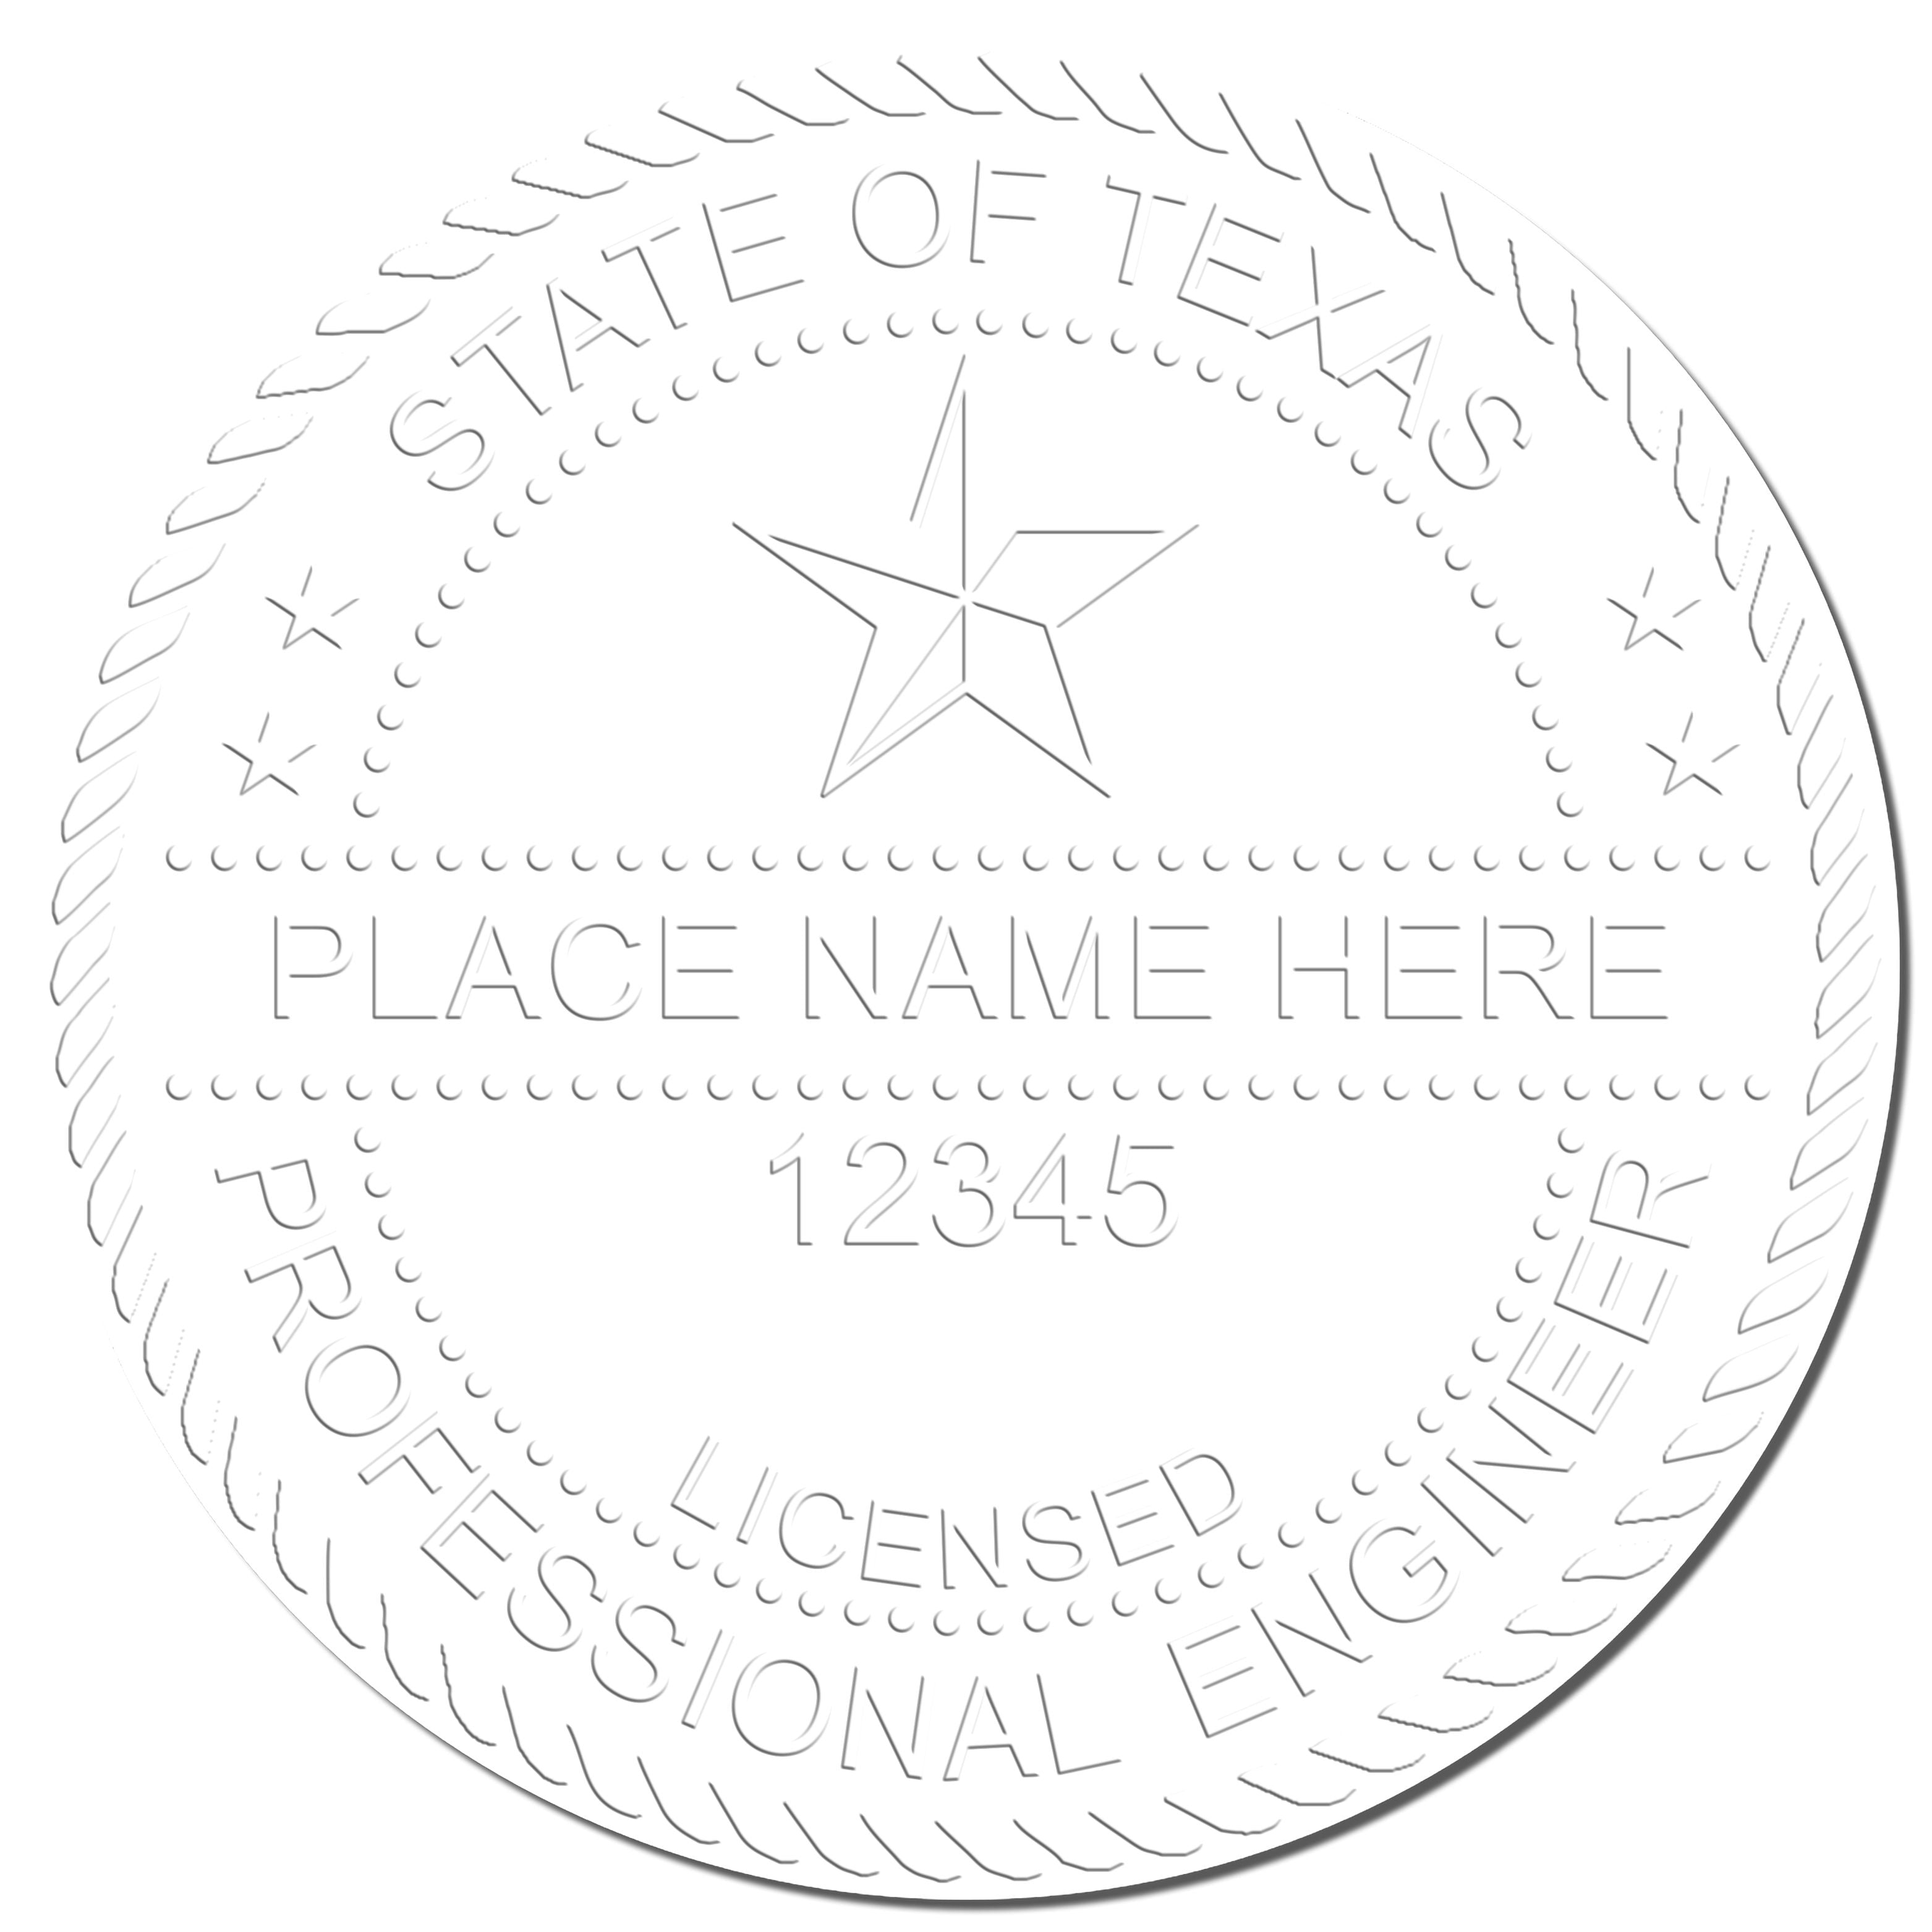 Another Example of a stamped impression of the Texas Engineer Desk Seal on a piece of office paper.